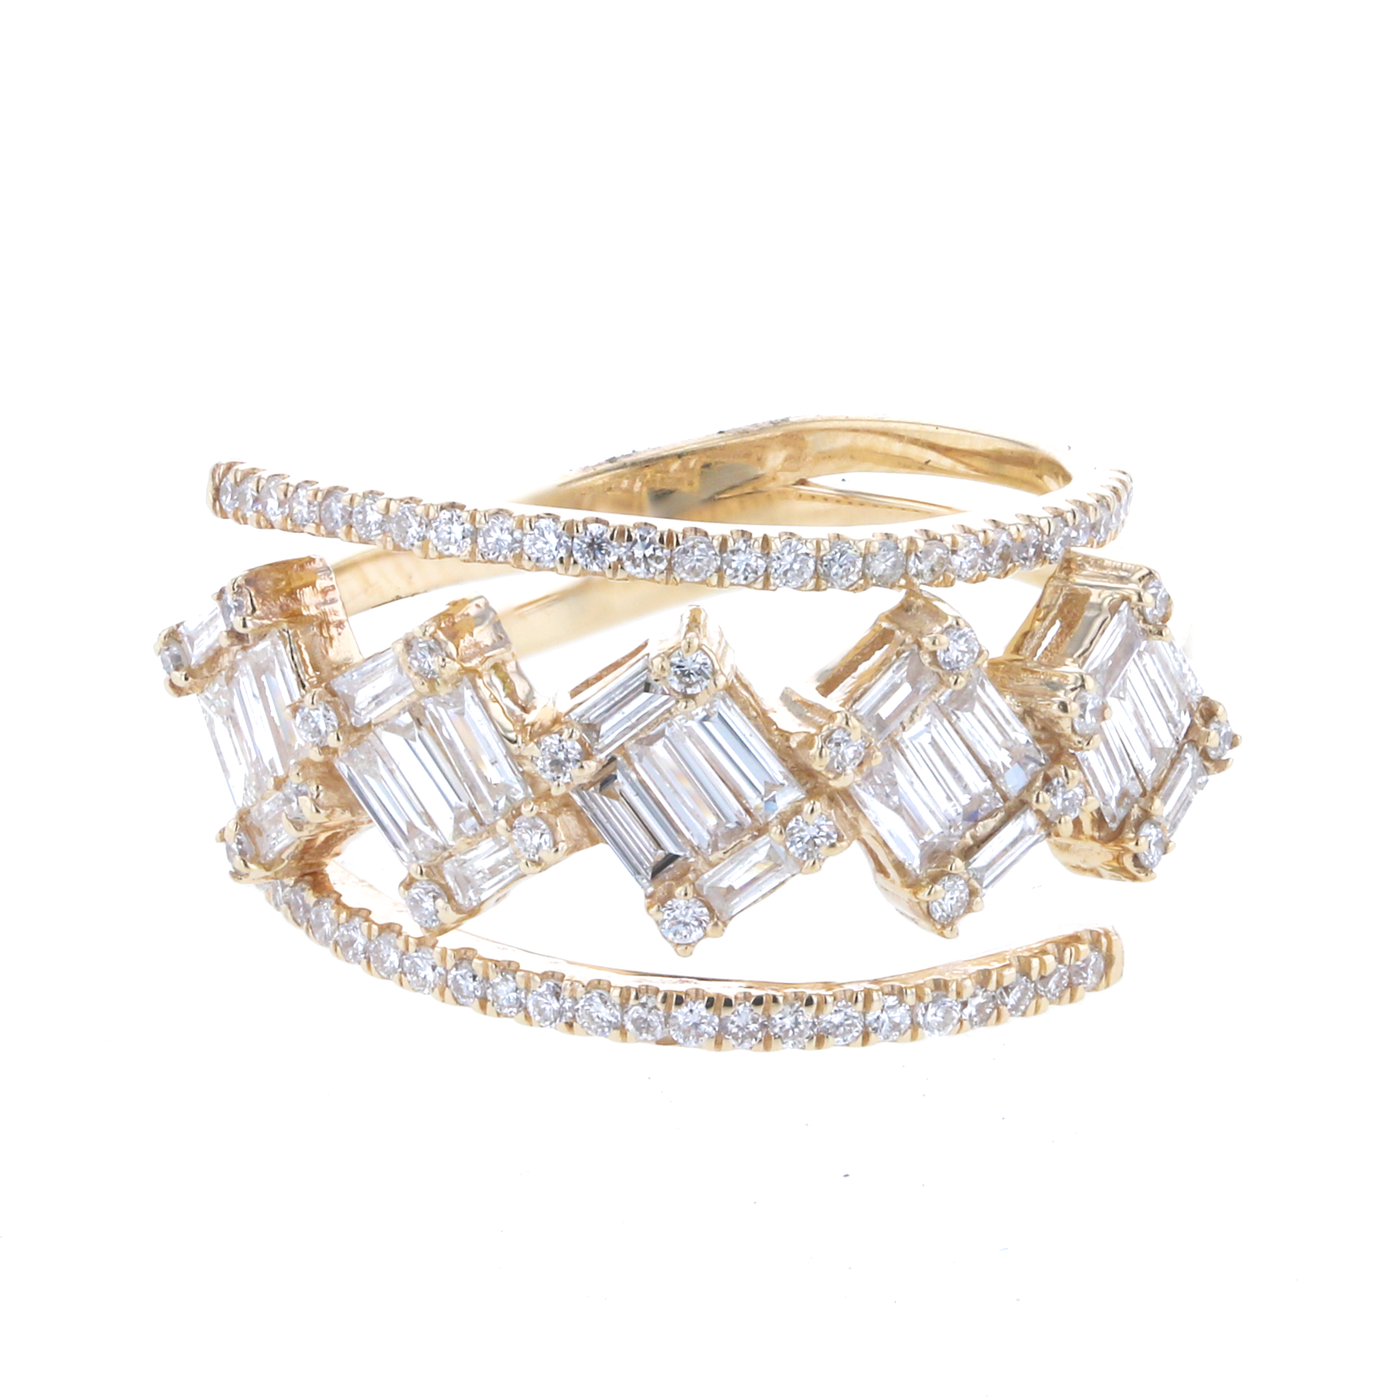 "The Jessica" 0.85 CTTW Baguette & Round Diamond Ring in 14K Yellow Gold